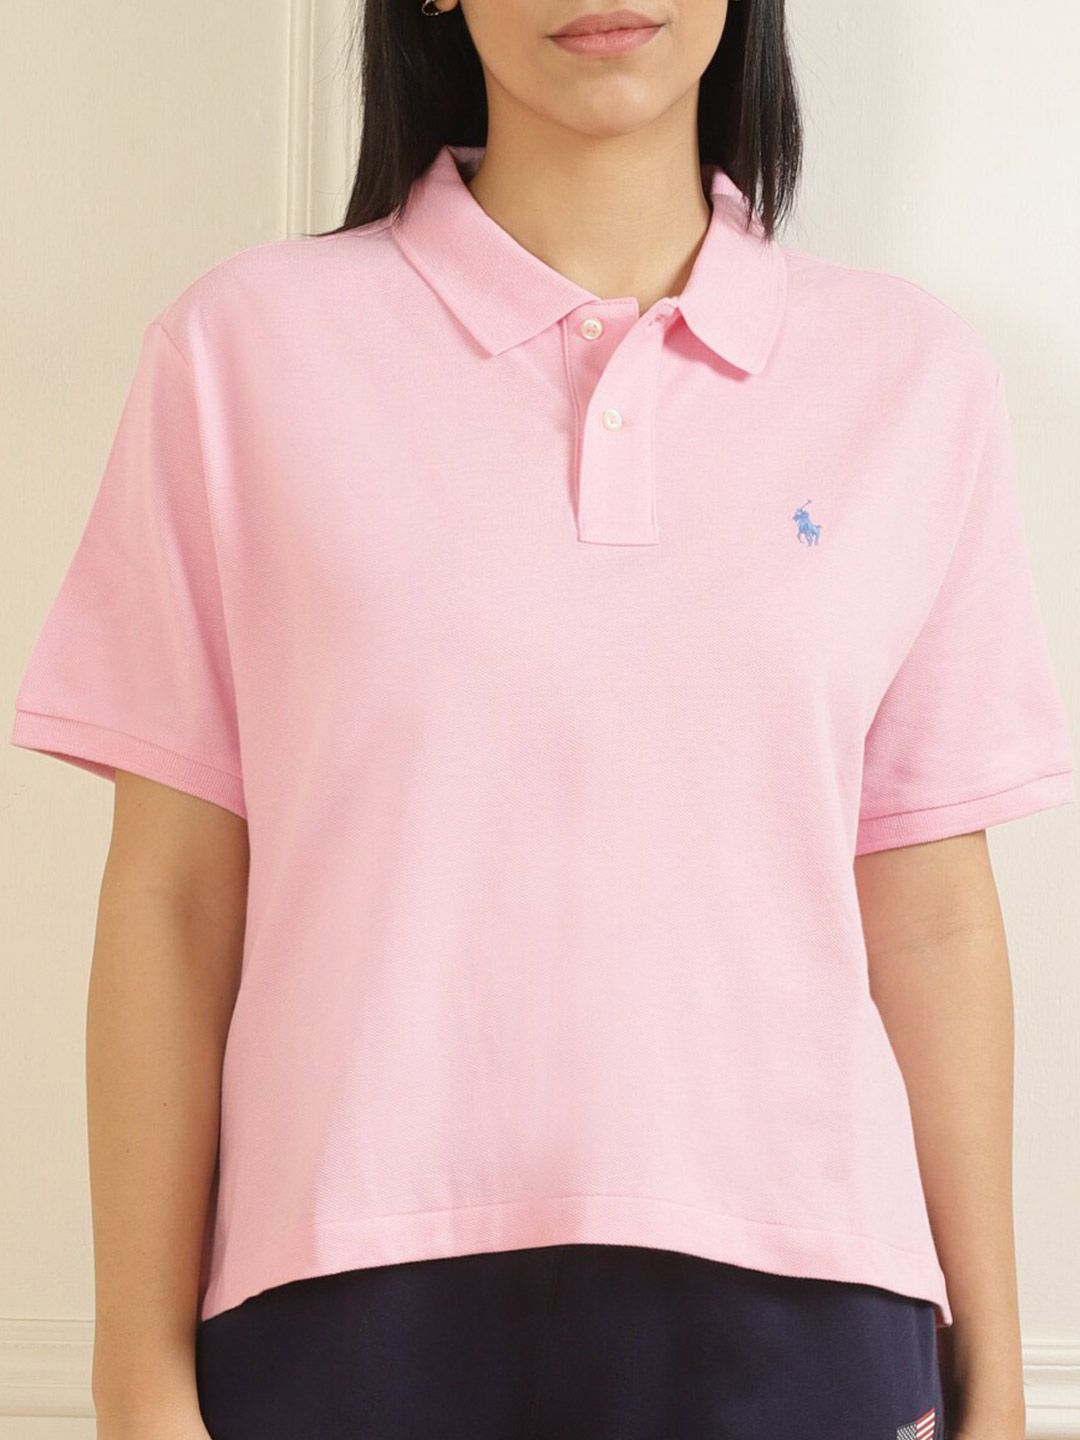 Polo Ralph Lauren Women Pink Shirt Style Top Price in India, Full  Specifications & Offers 